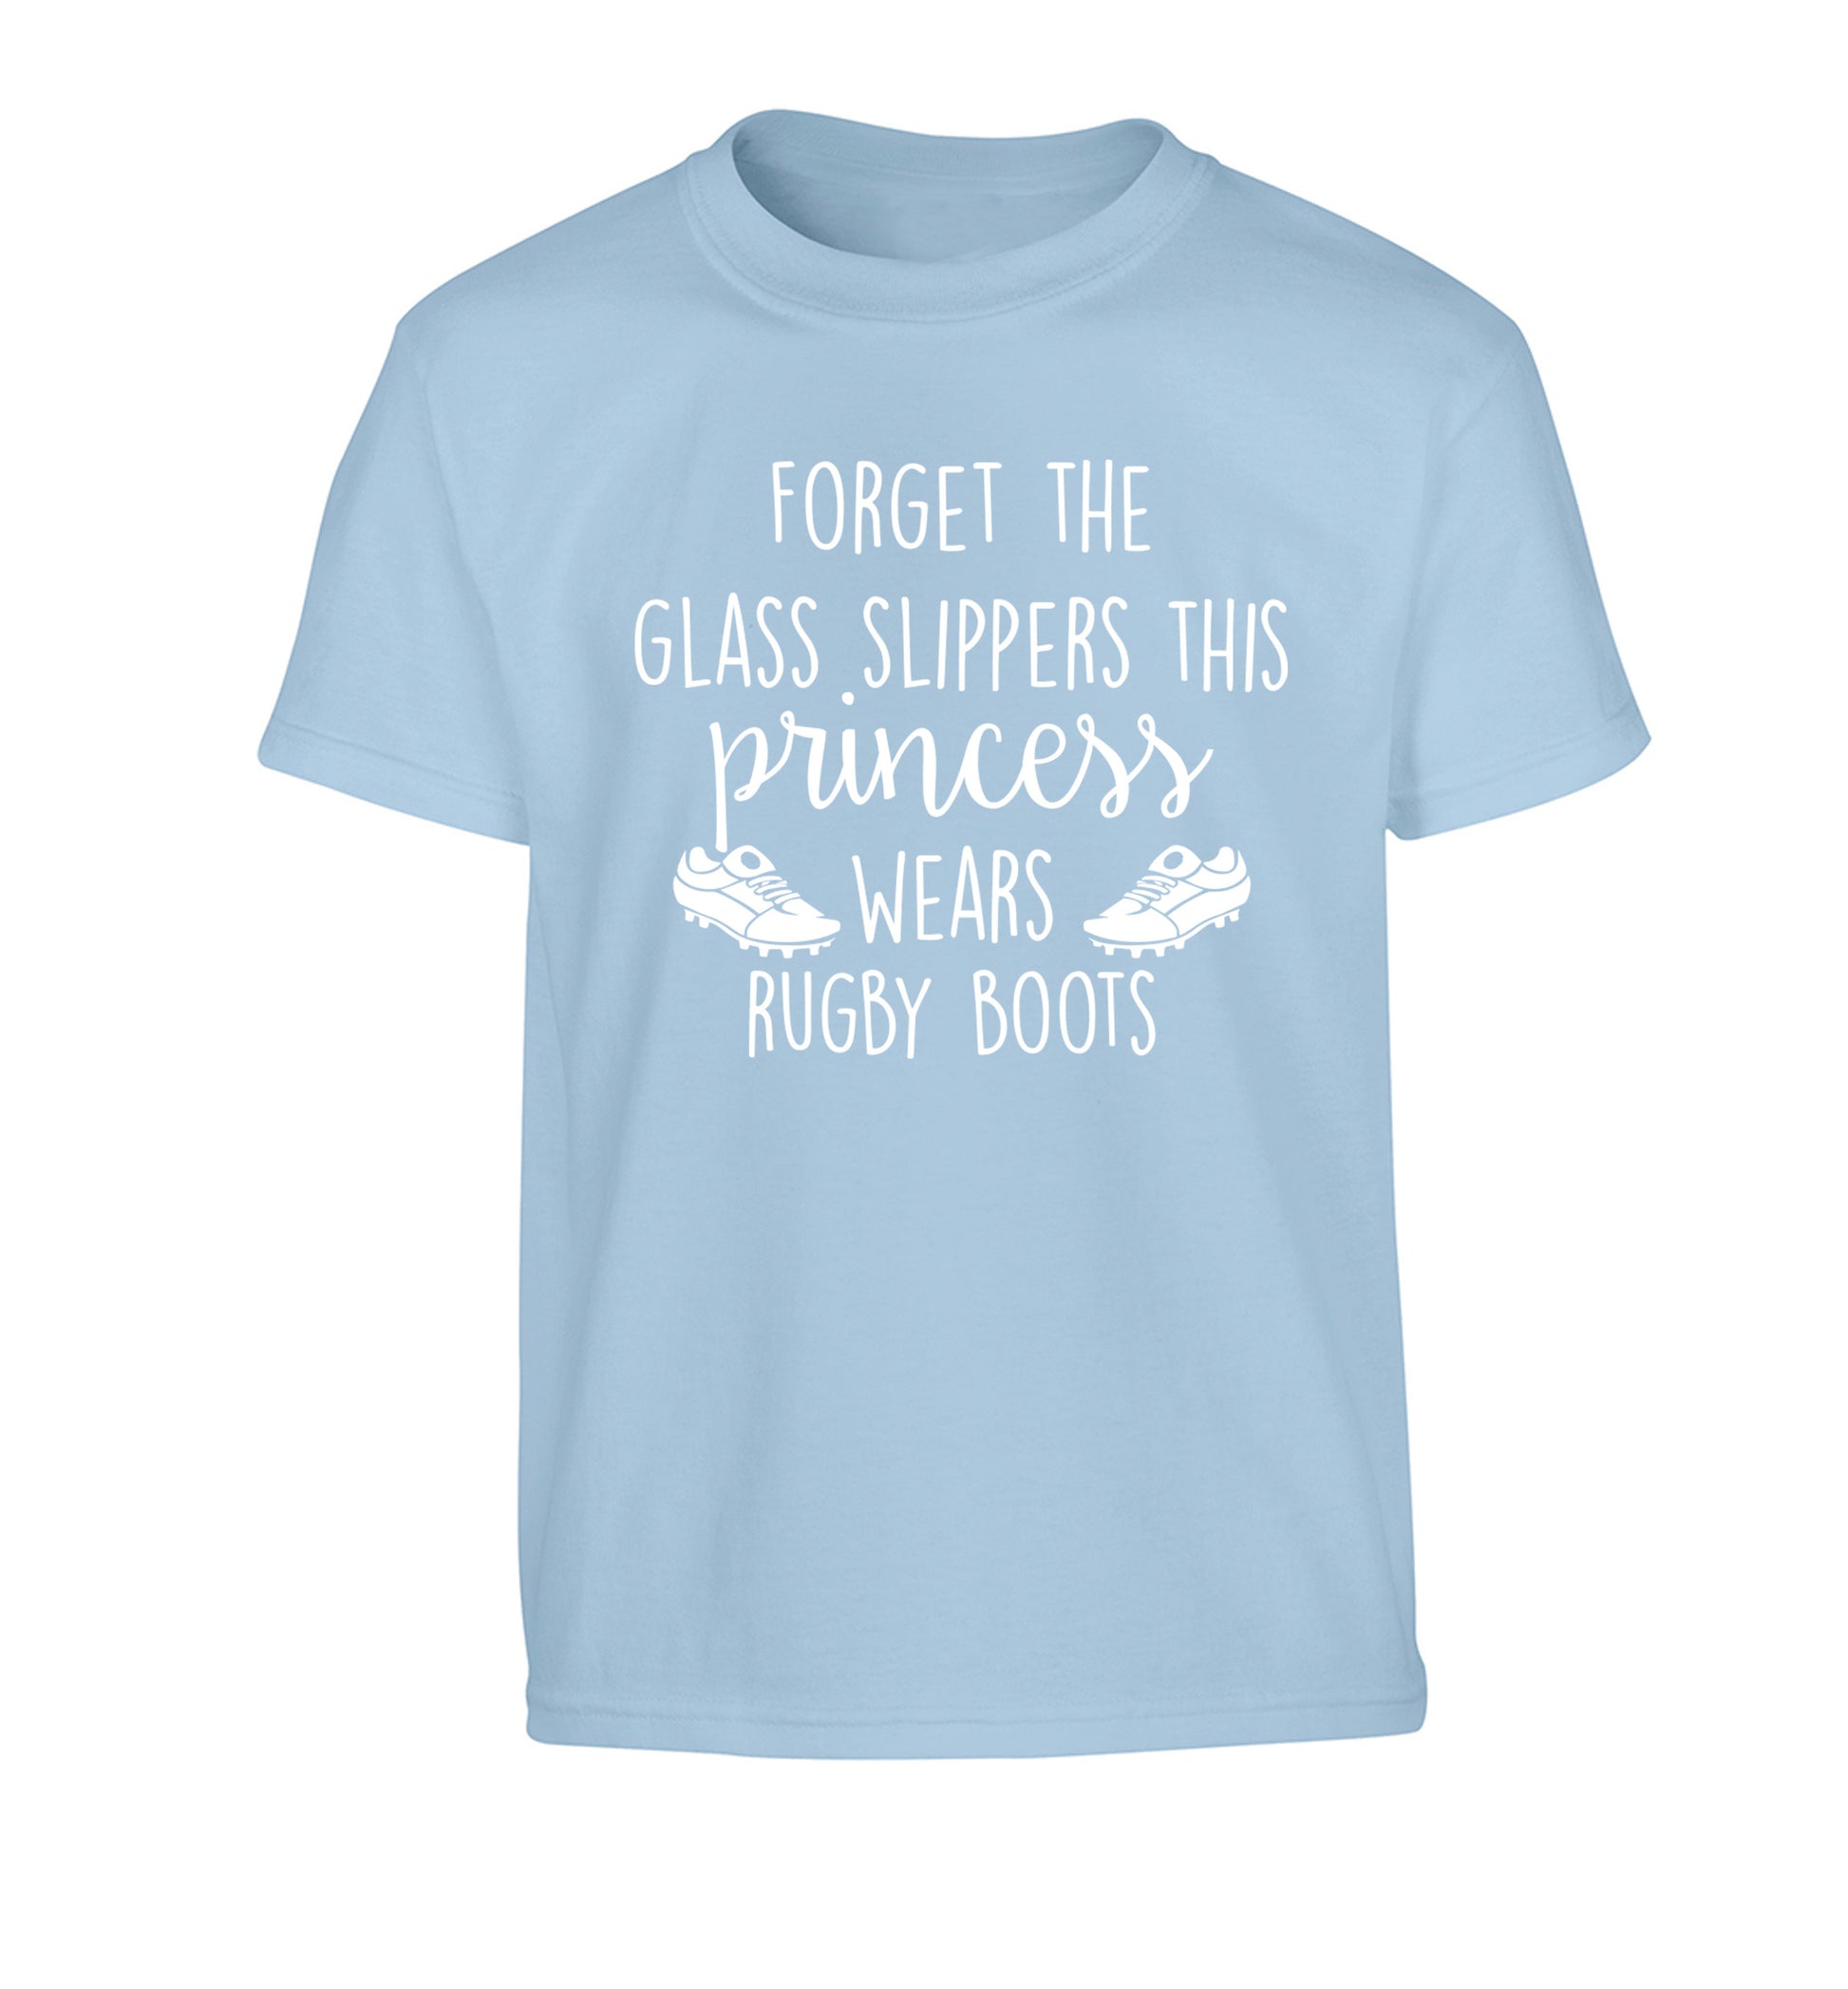 Forget the glass slippers this princess wears rugby boots Children's light blue Tshirt 12-14 Years